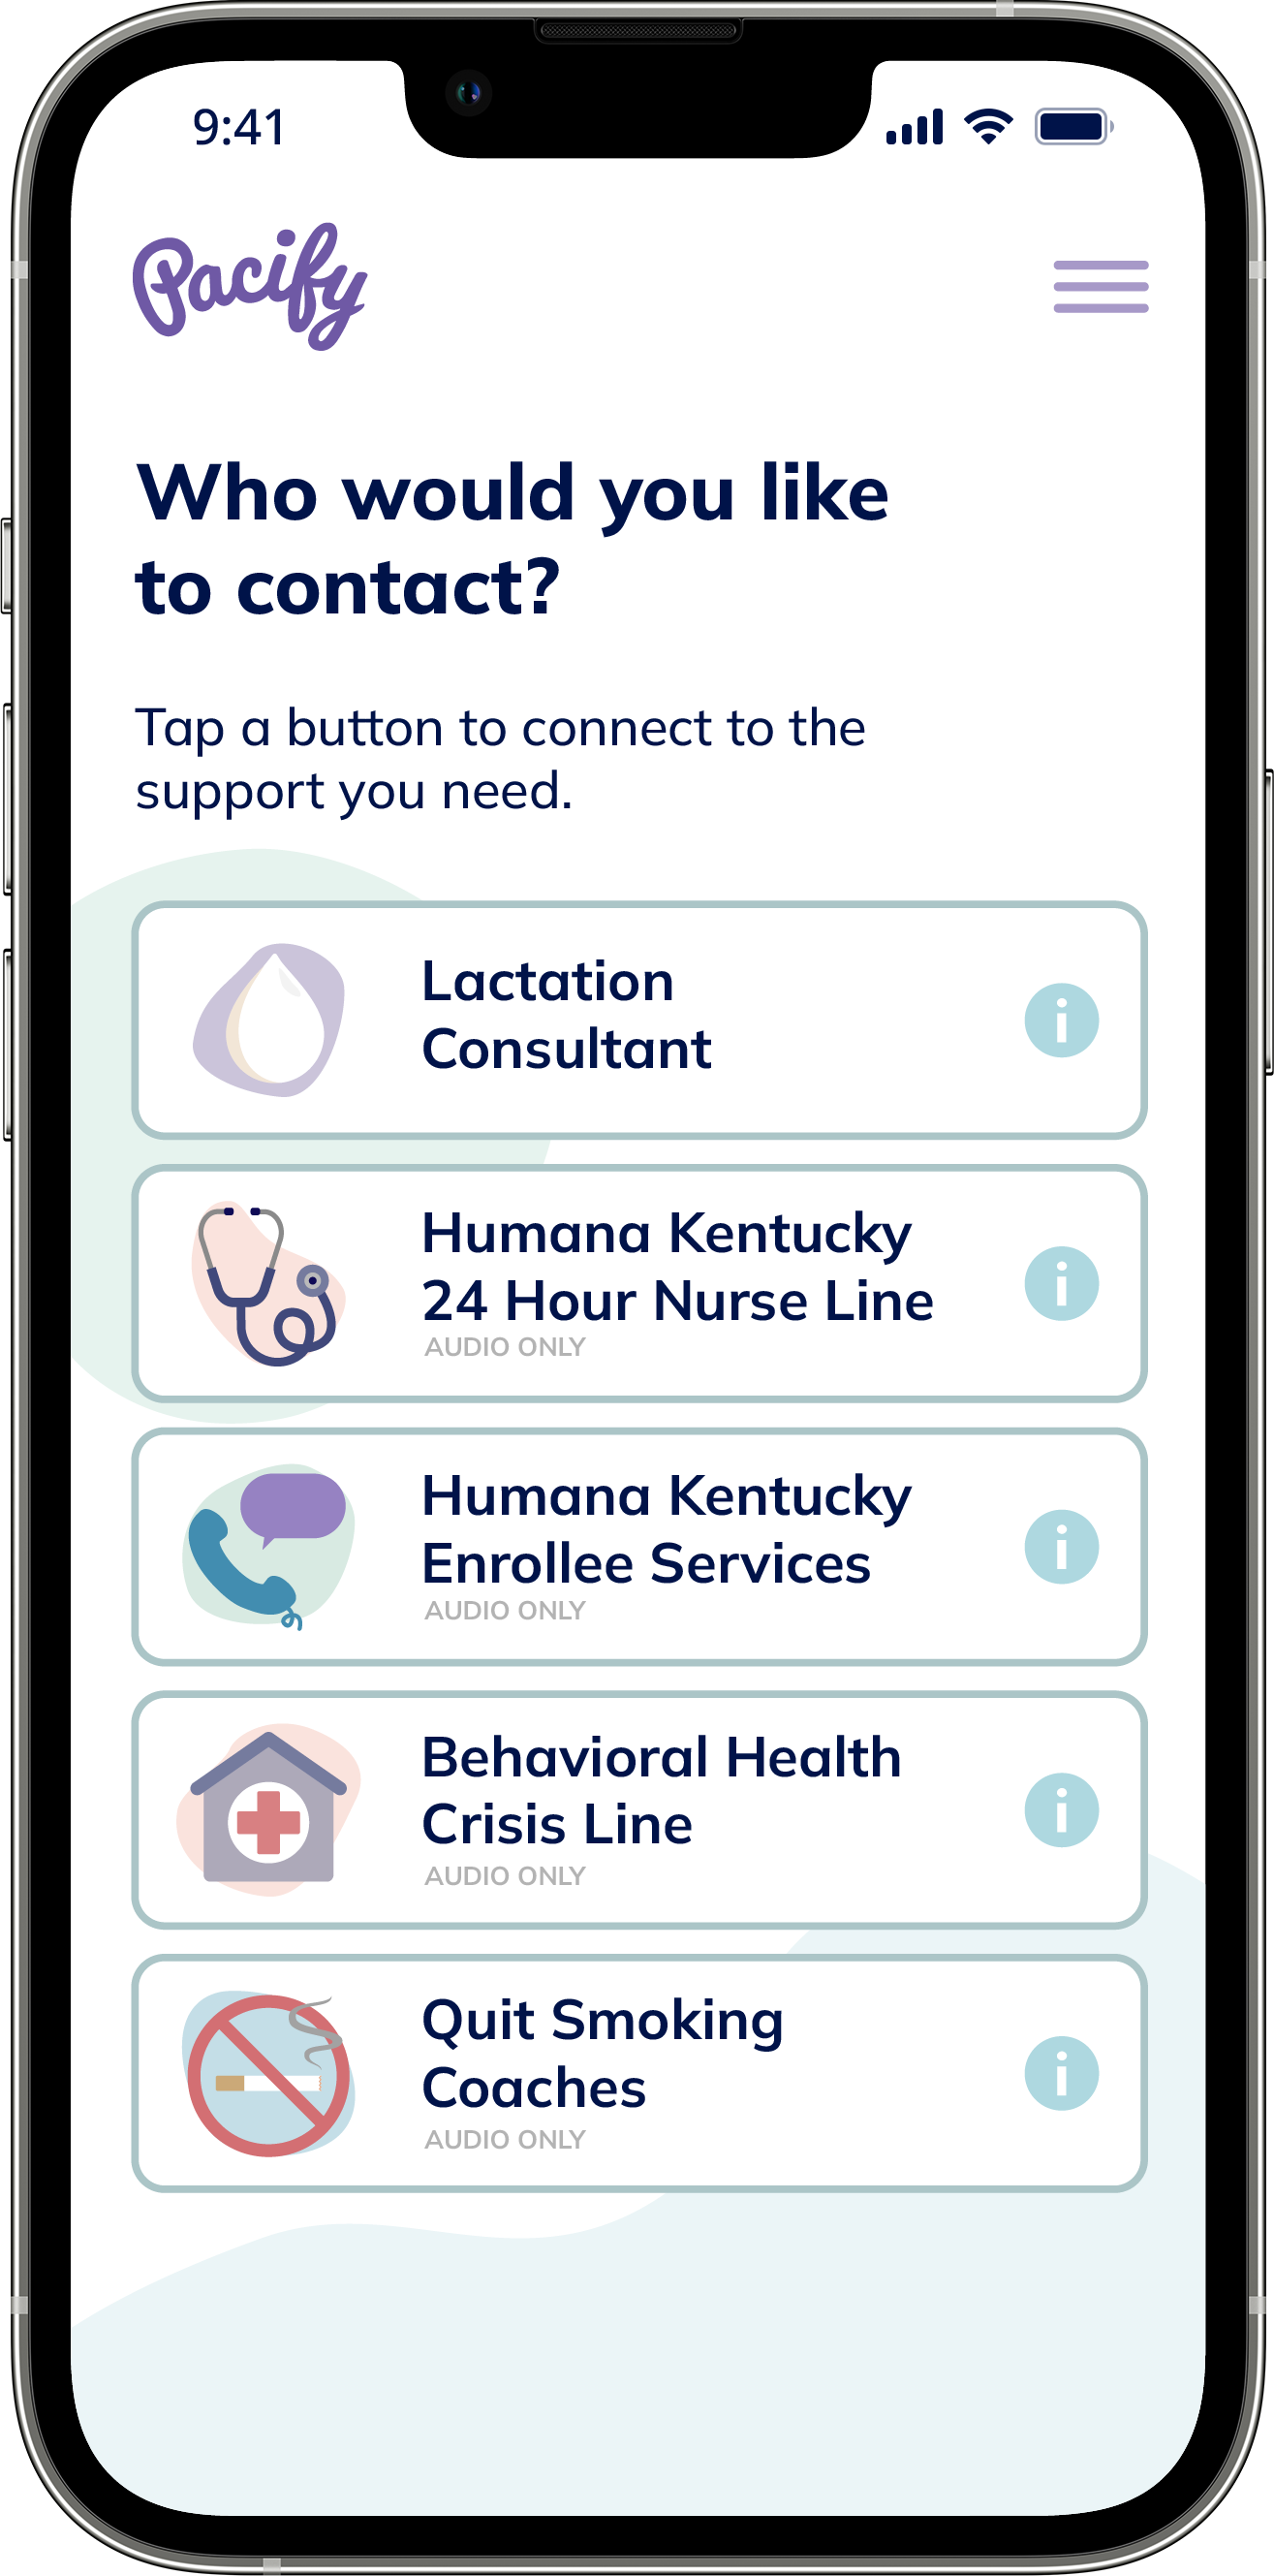 Home screen of Pacify app showing call buttons to Lactation Consultants, Humana Kentucky 24 Hour Nurse Line, Humana Kentucky Enrollee Services, Behavior Health Crisis Line, and Quit Smoking Coaches.